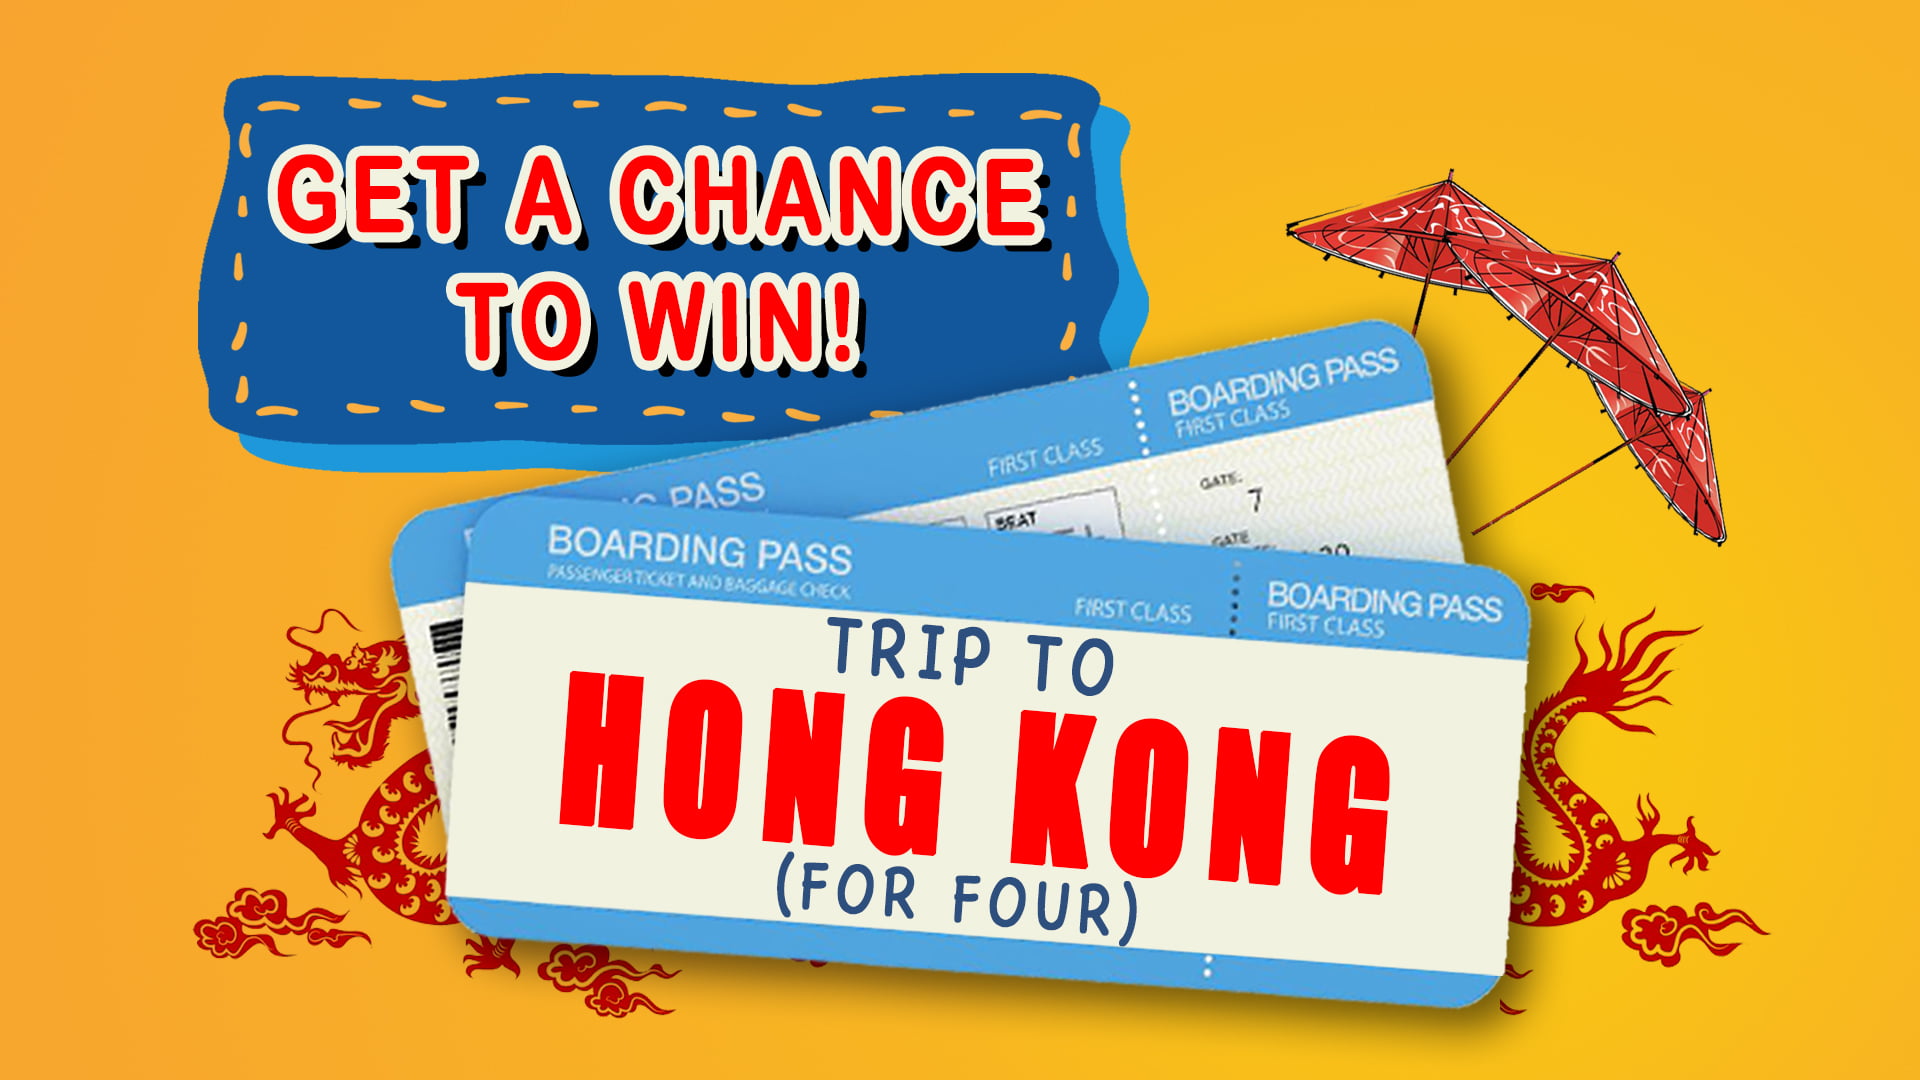 Bonamine Travel and Win | Win a trip to Hong Kong (for 4)!